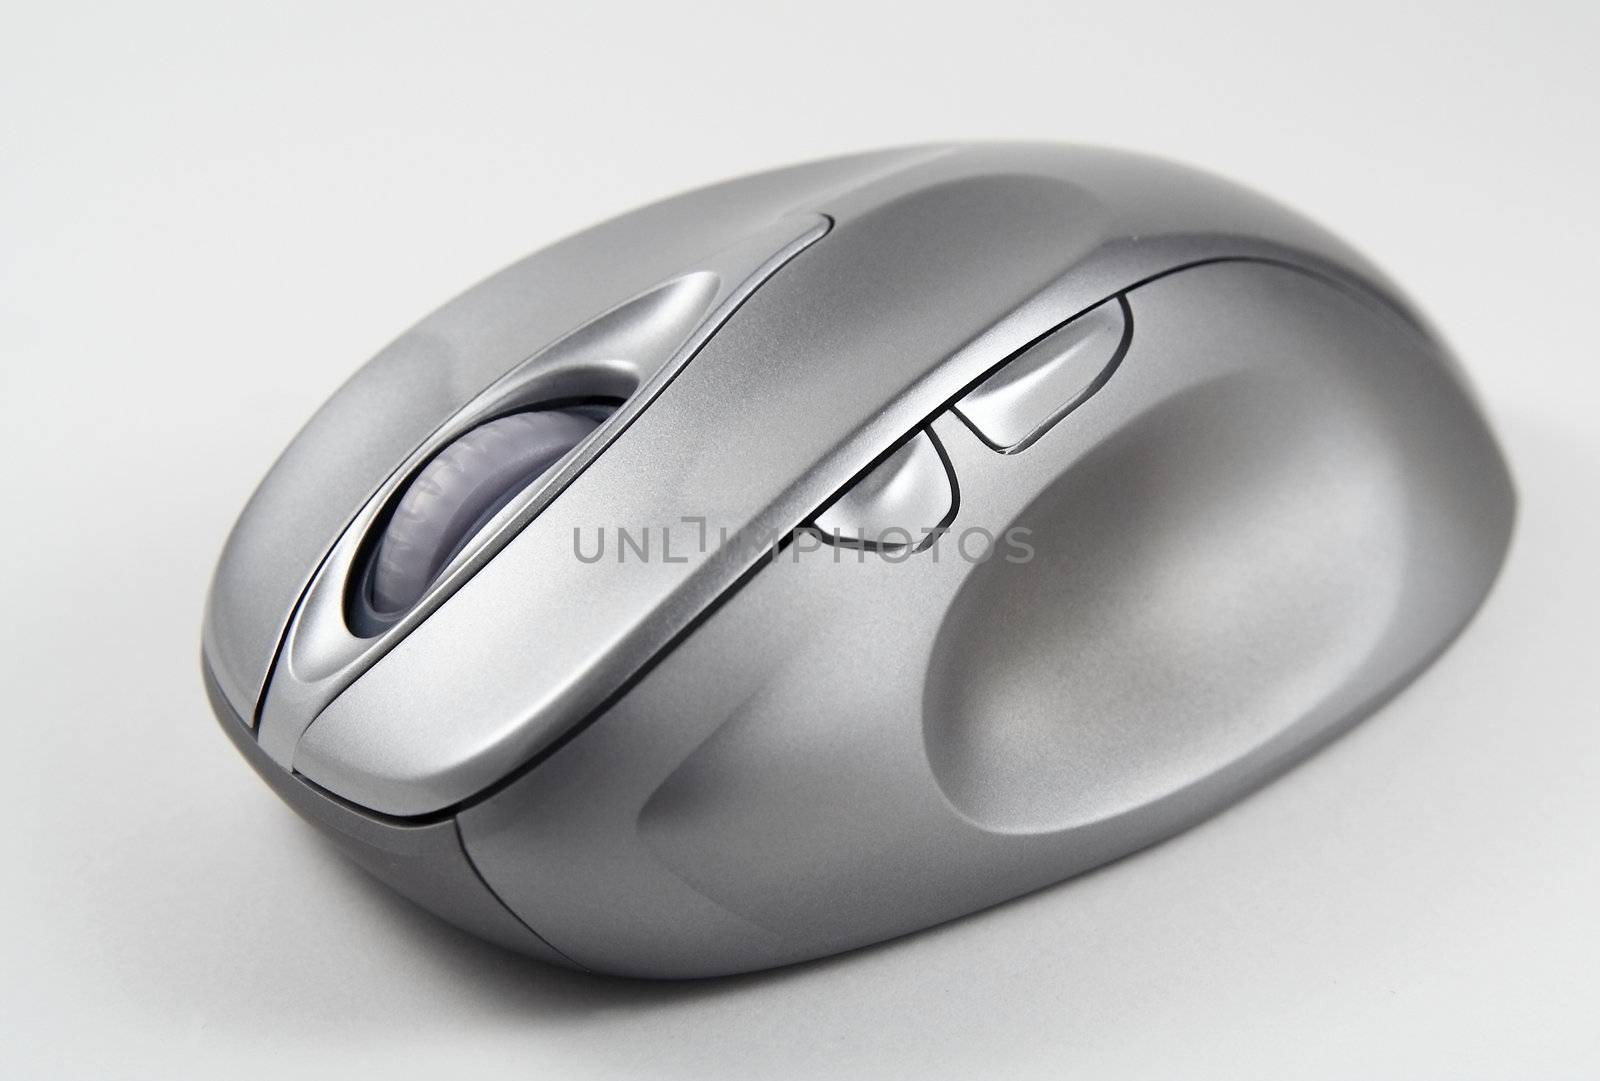 Cordless optical mouse by serpl